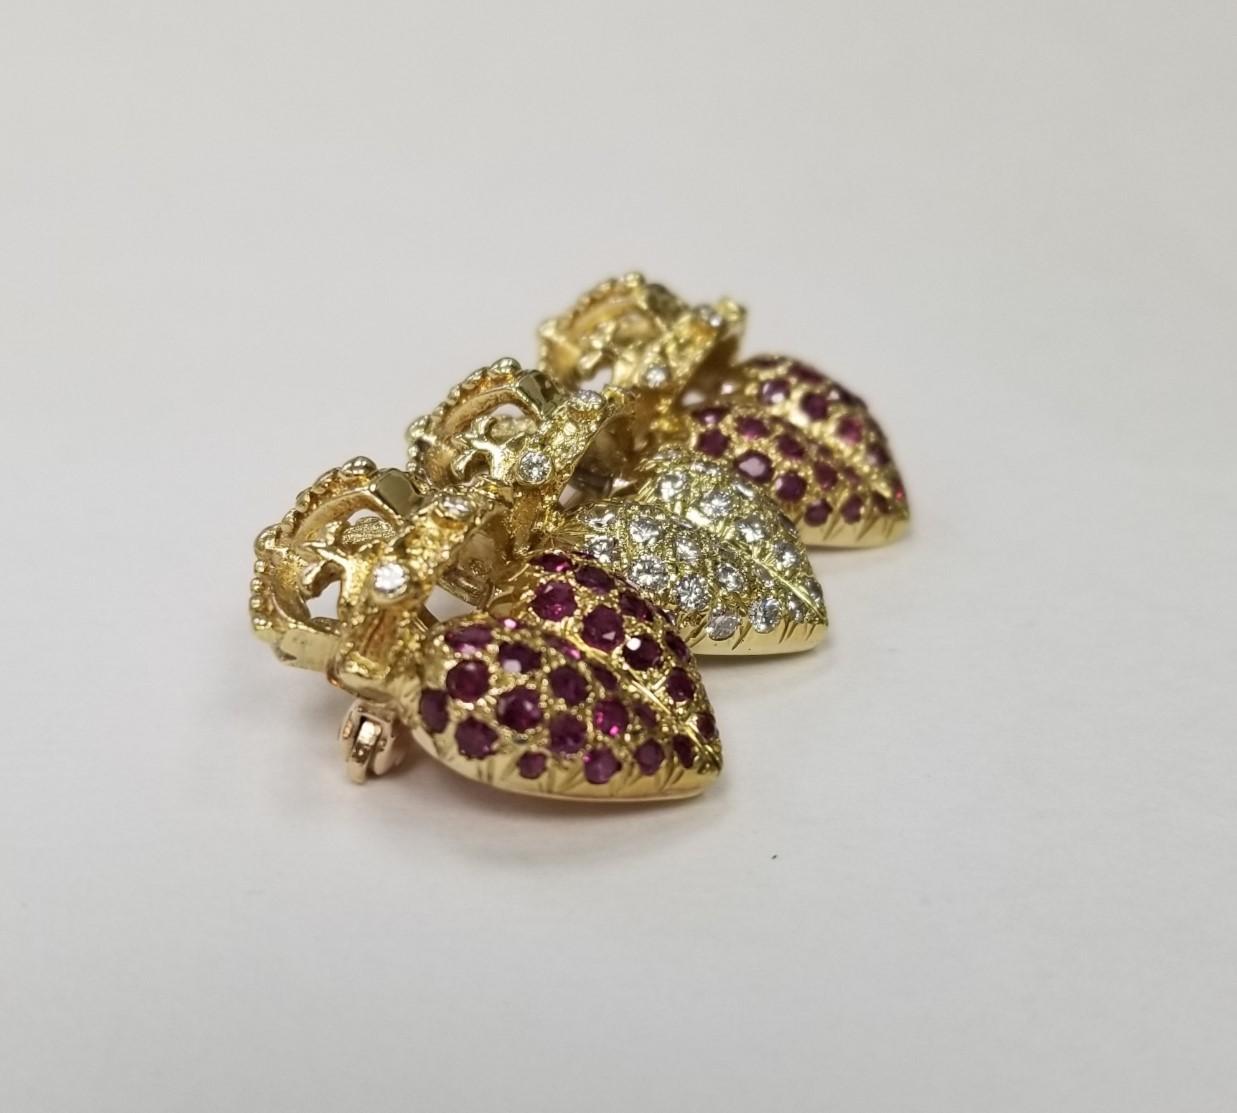 Specifications:
*Motivated to Sell – Please make a Fair Offer*
Metal: 18K (Au 72.91-75%)
Weight: 16.2G
Main Stone:  43 Diamonds 1.15cts.
Color: G 
Clarity: VS
Secondary Stone: 56 Rubies 1.70cts.
